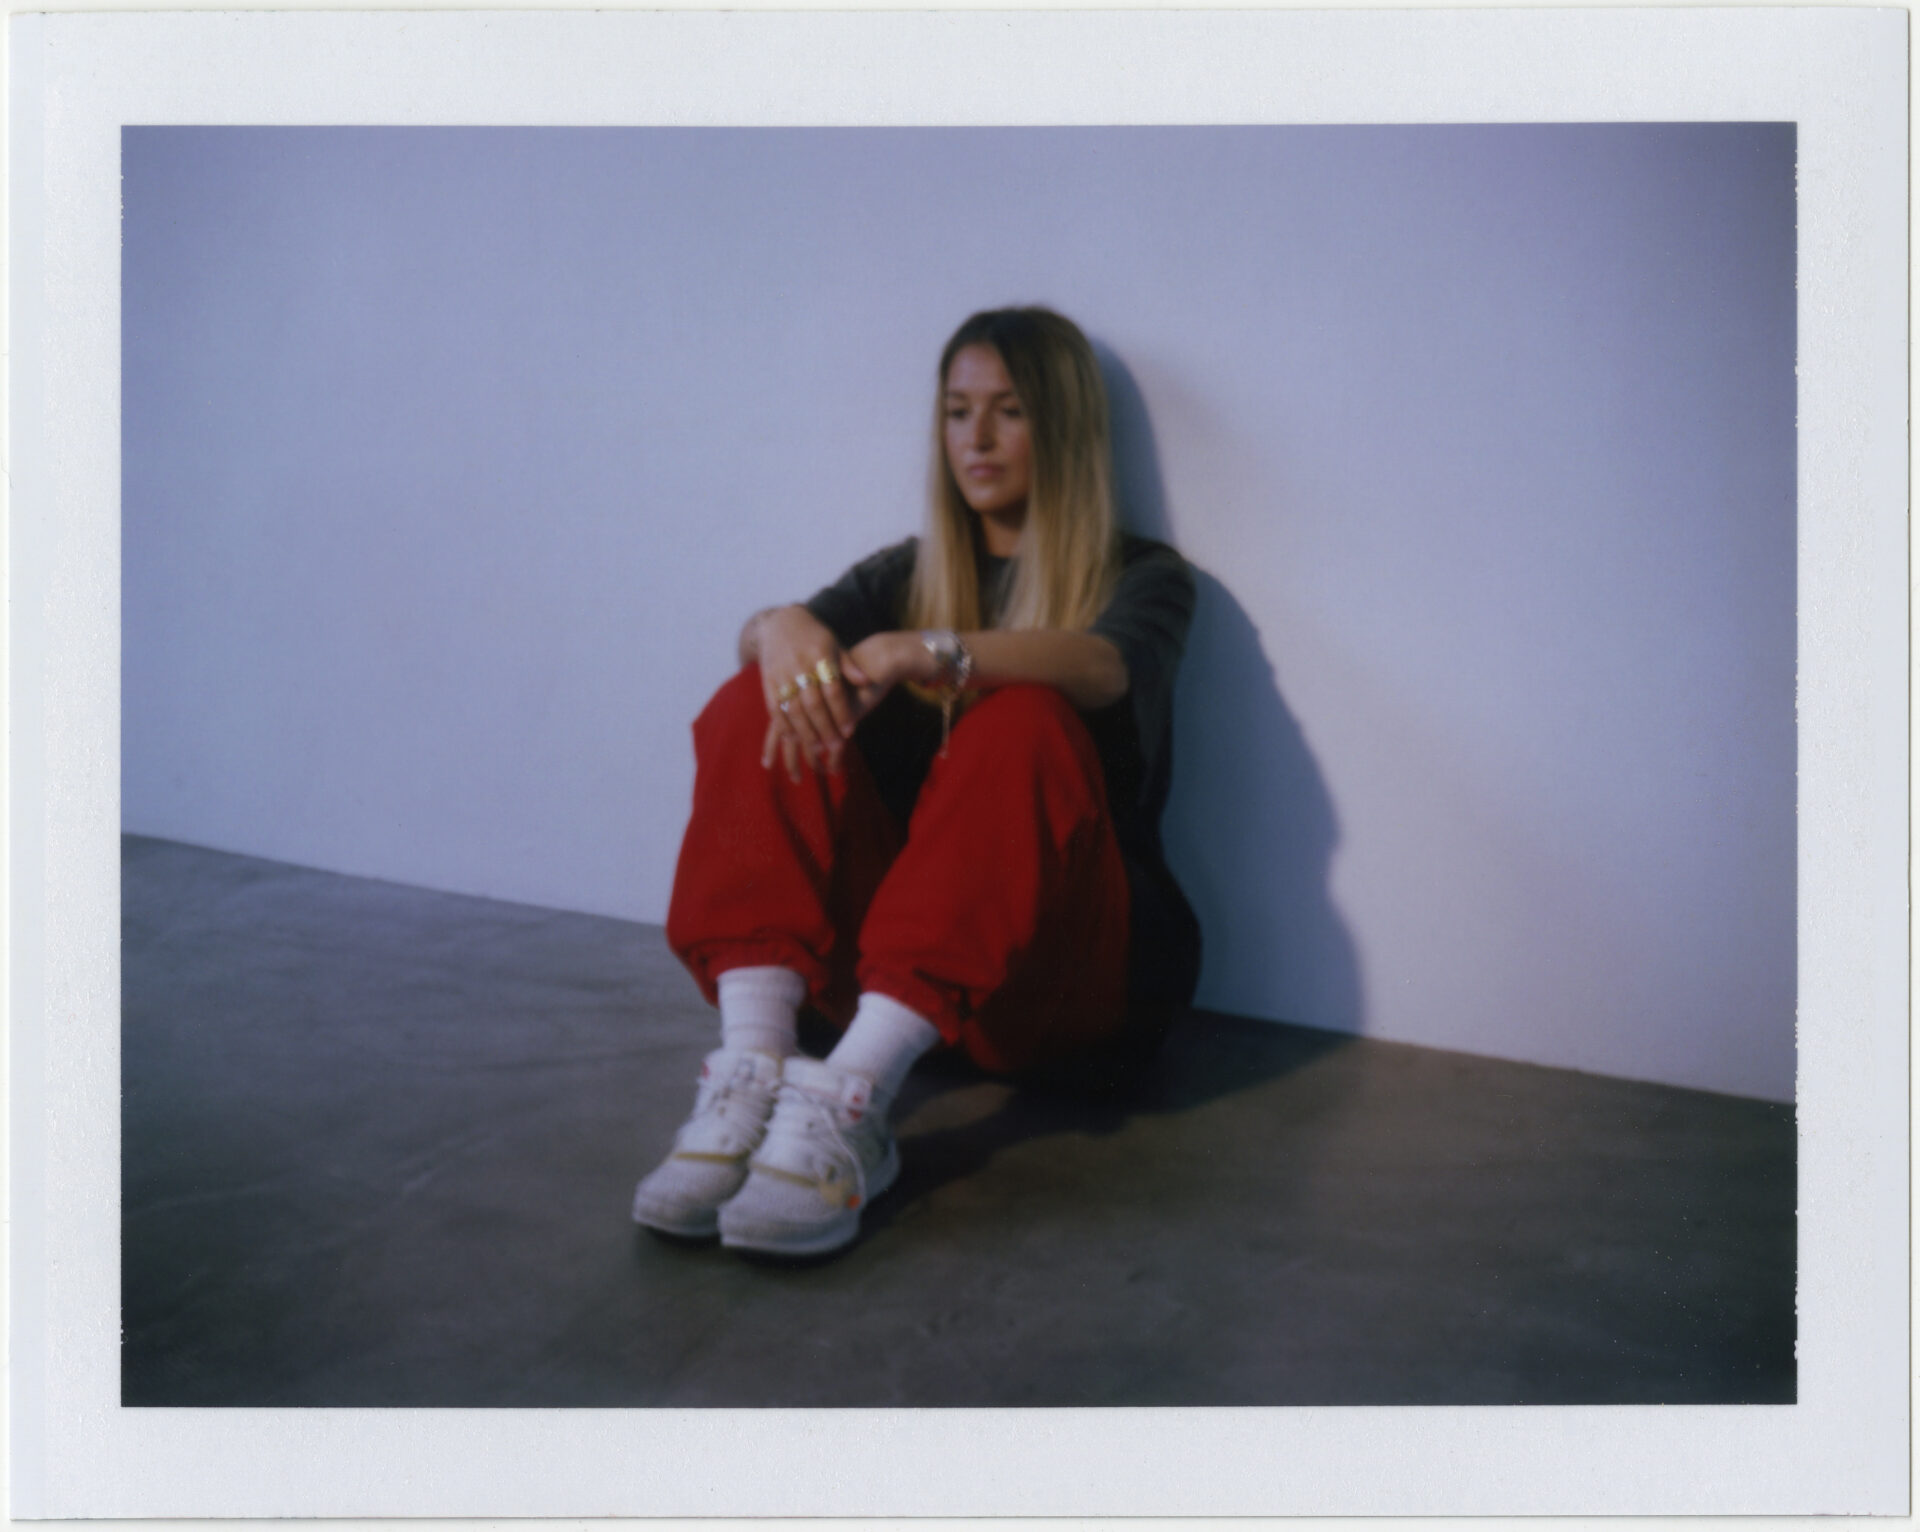 INTERVIEW: Chelsea Cutler on her debut album, ‘How to be Human’